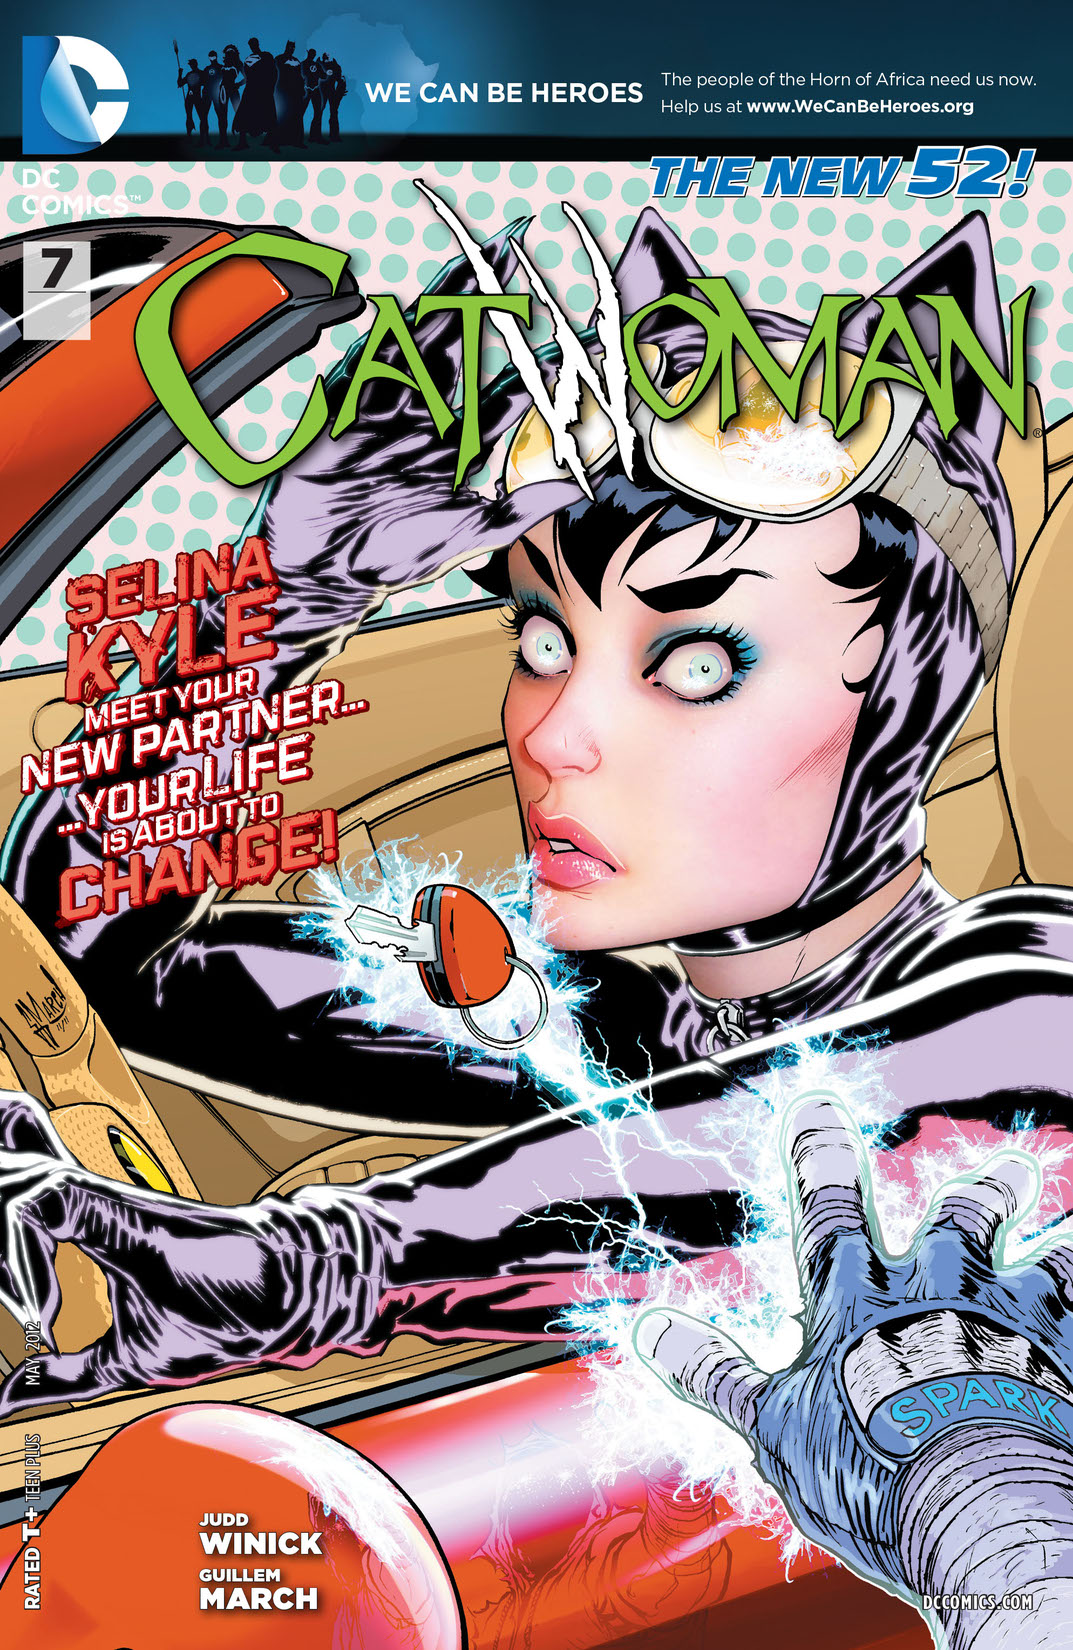 Catwoman (2011-) #7 preview images